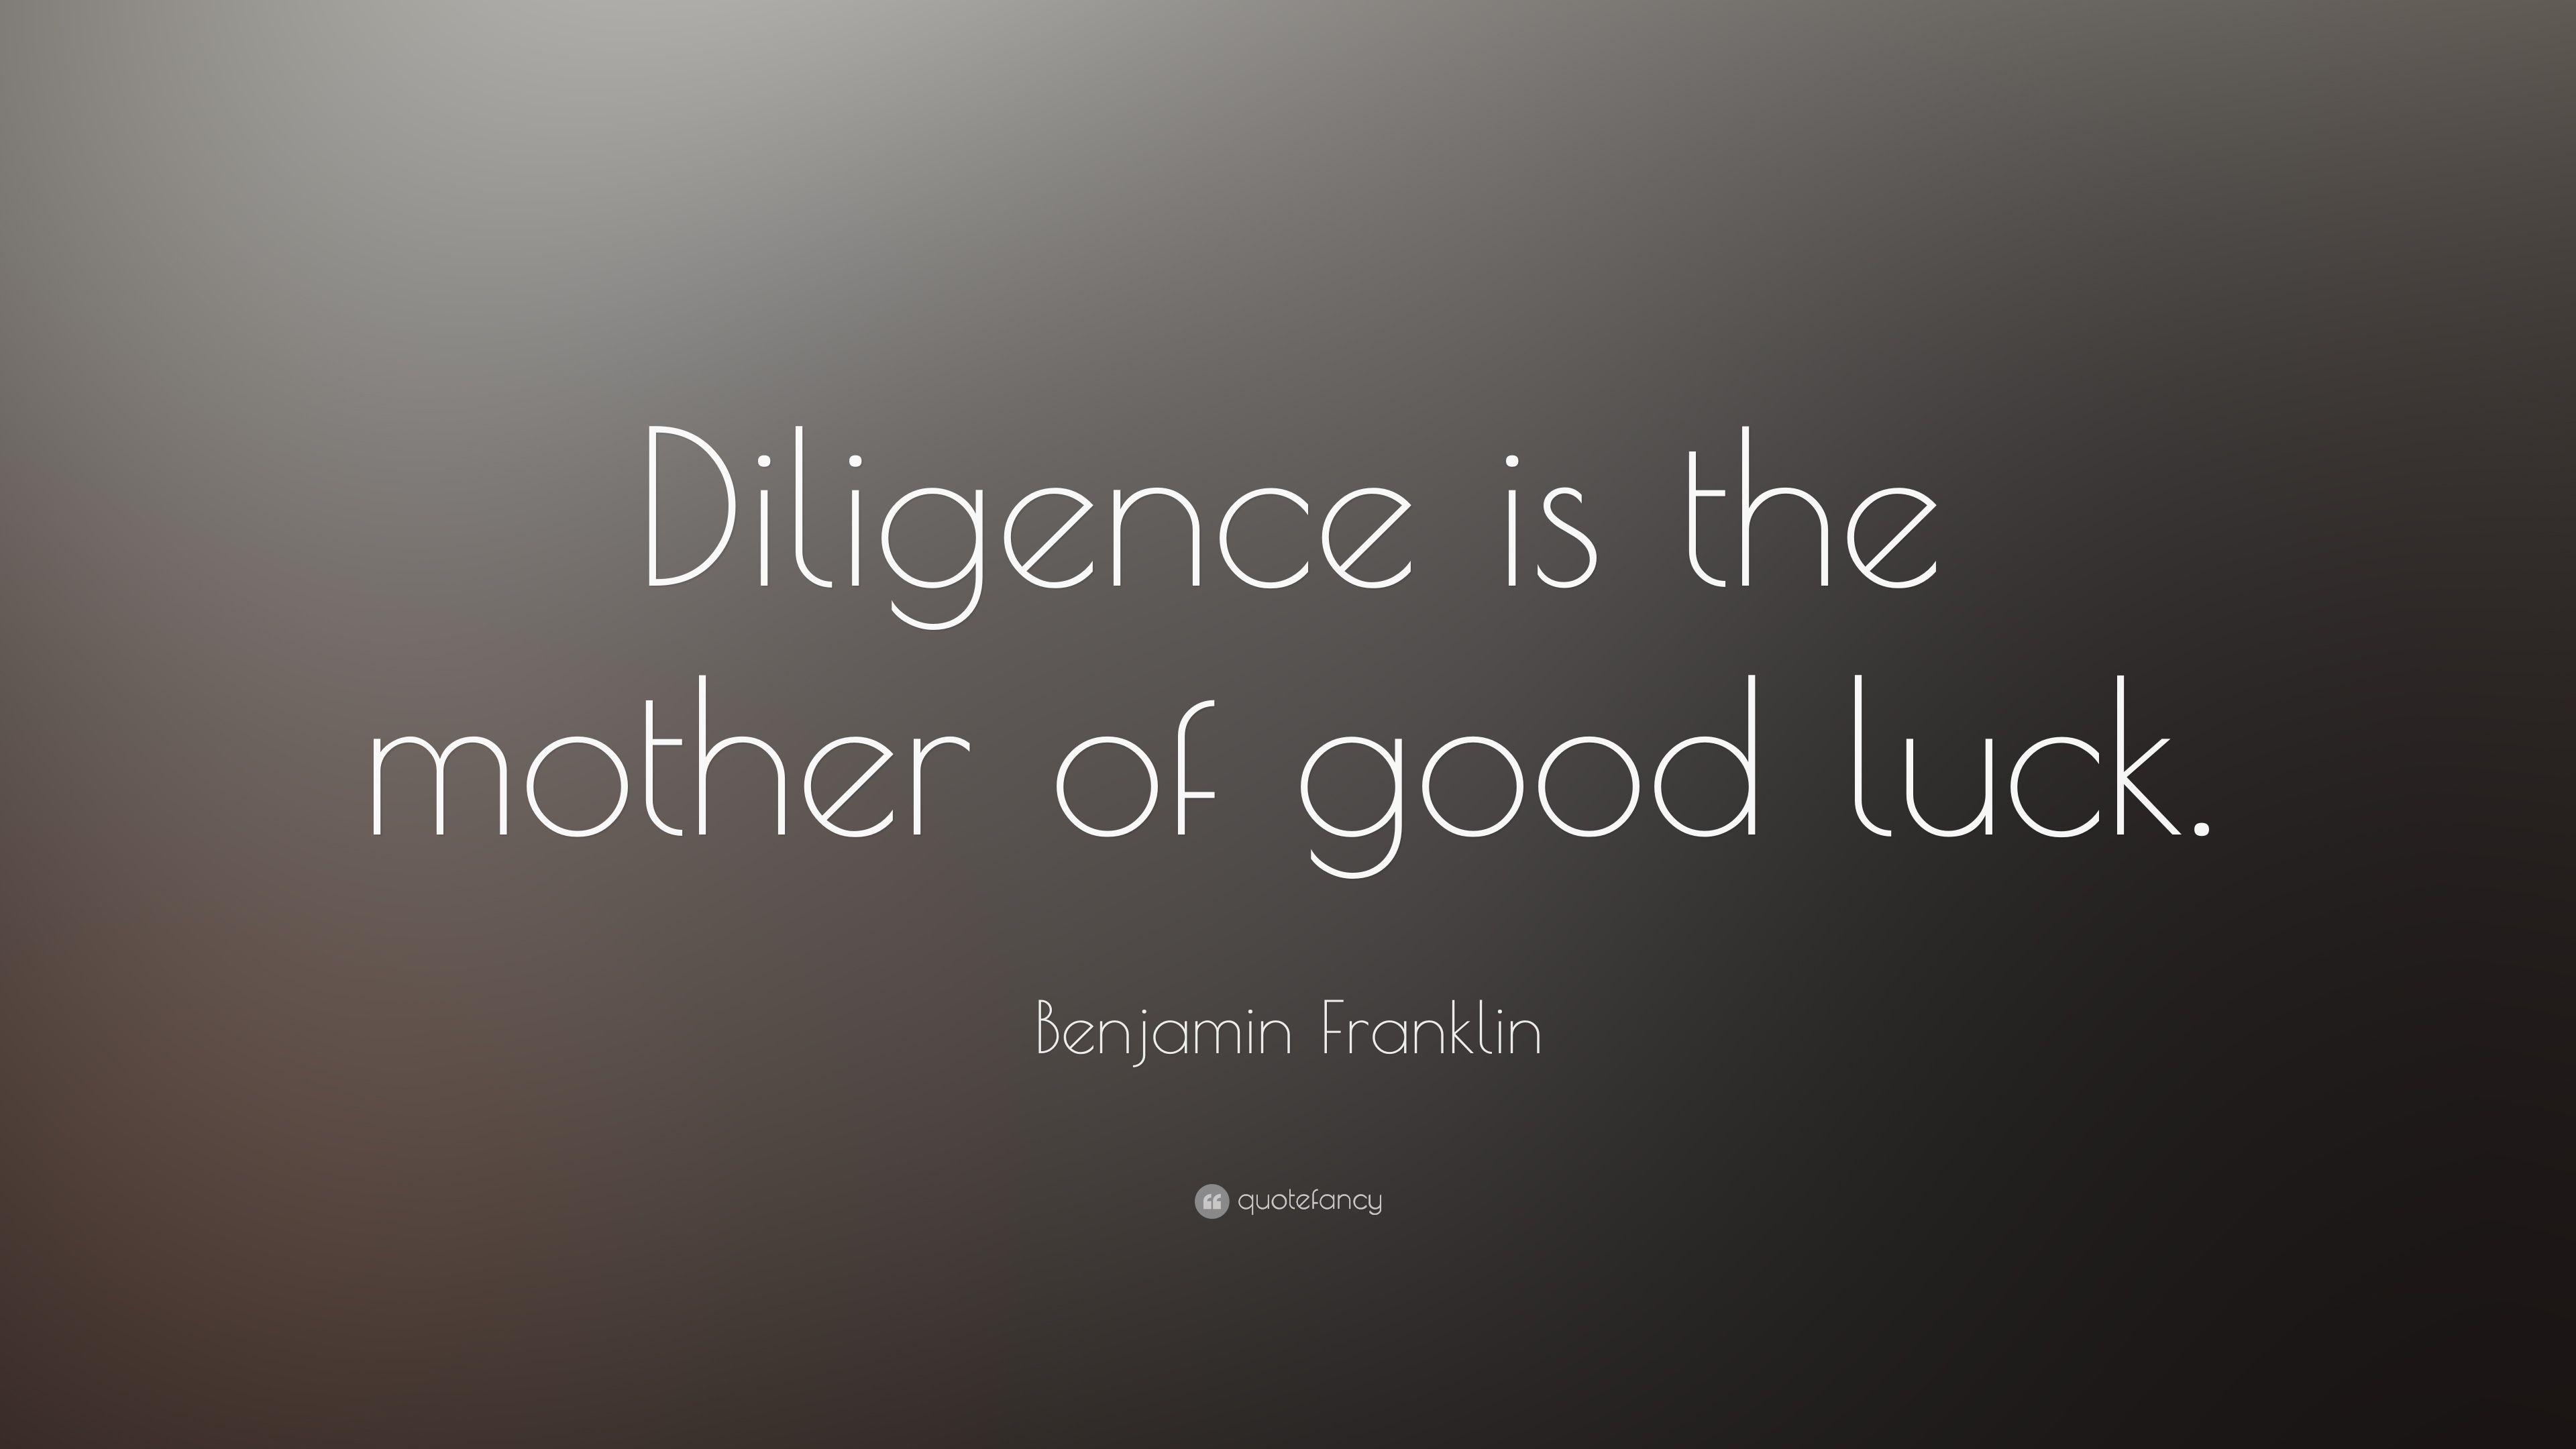 Benjamin Franklin Quote: "Diligence is the mother of good luck. 